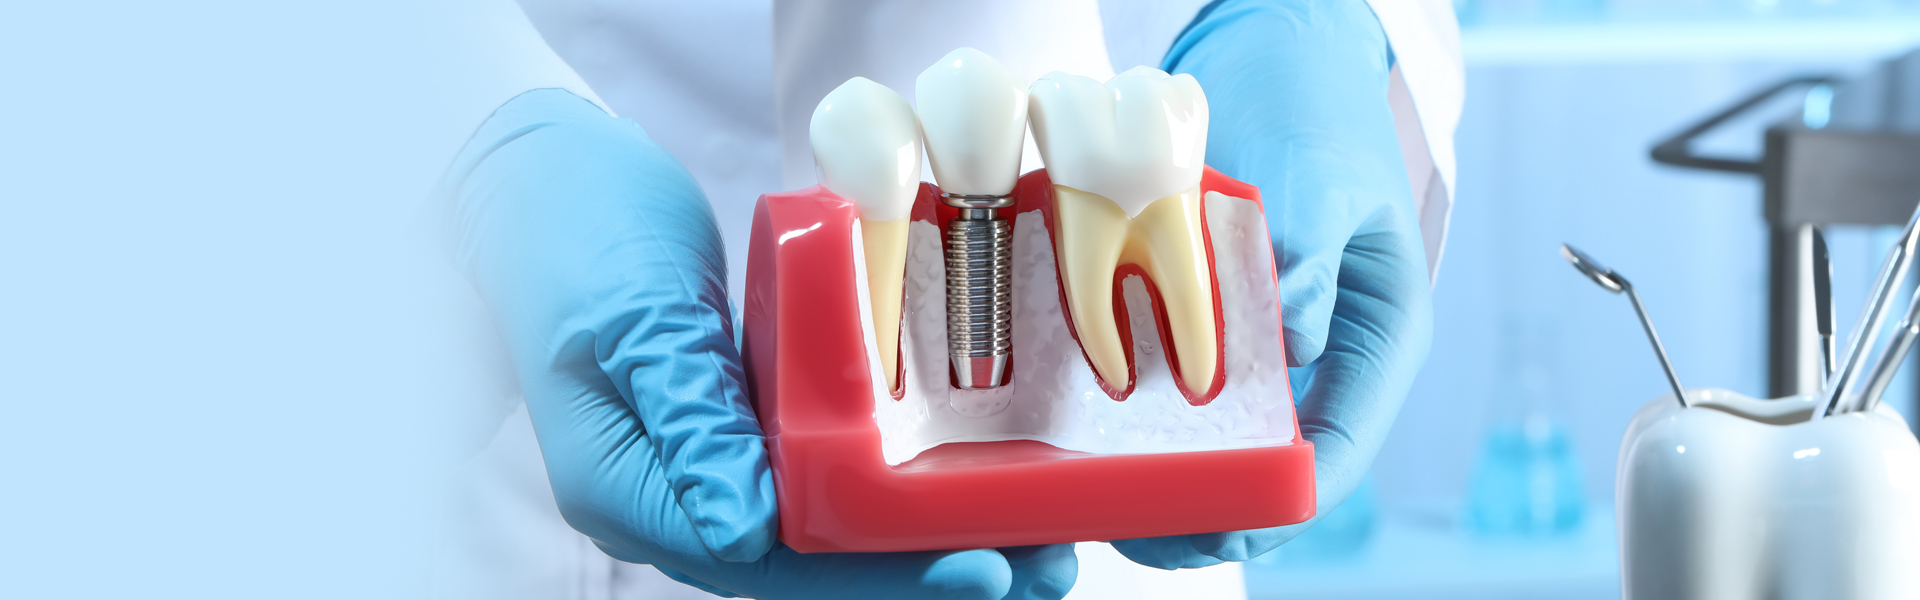 How Do You Care for Your Dental Implants?